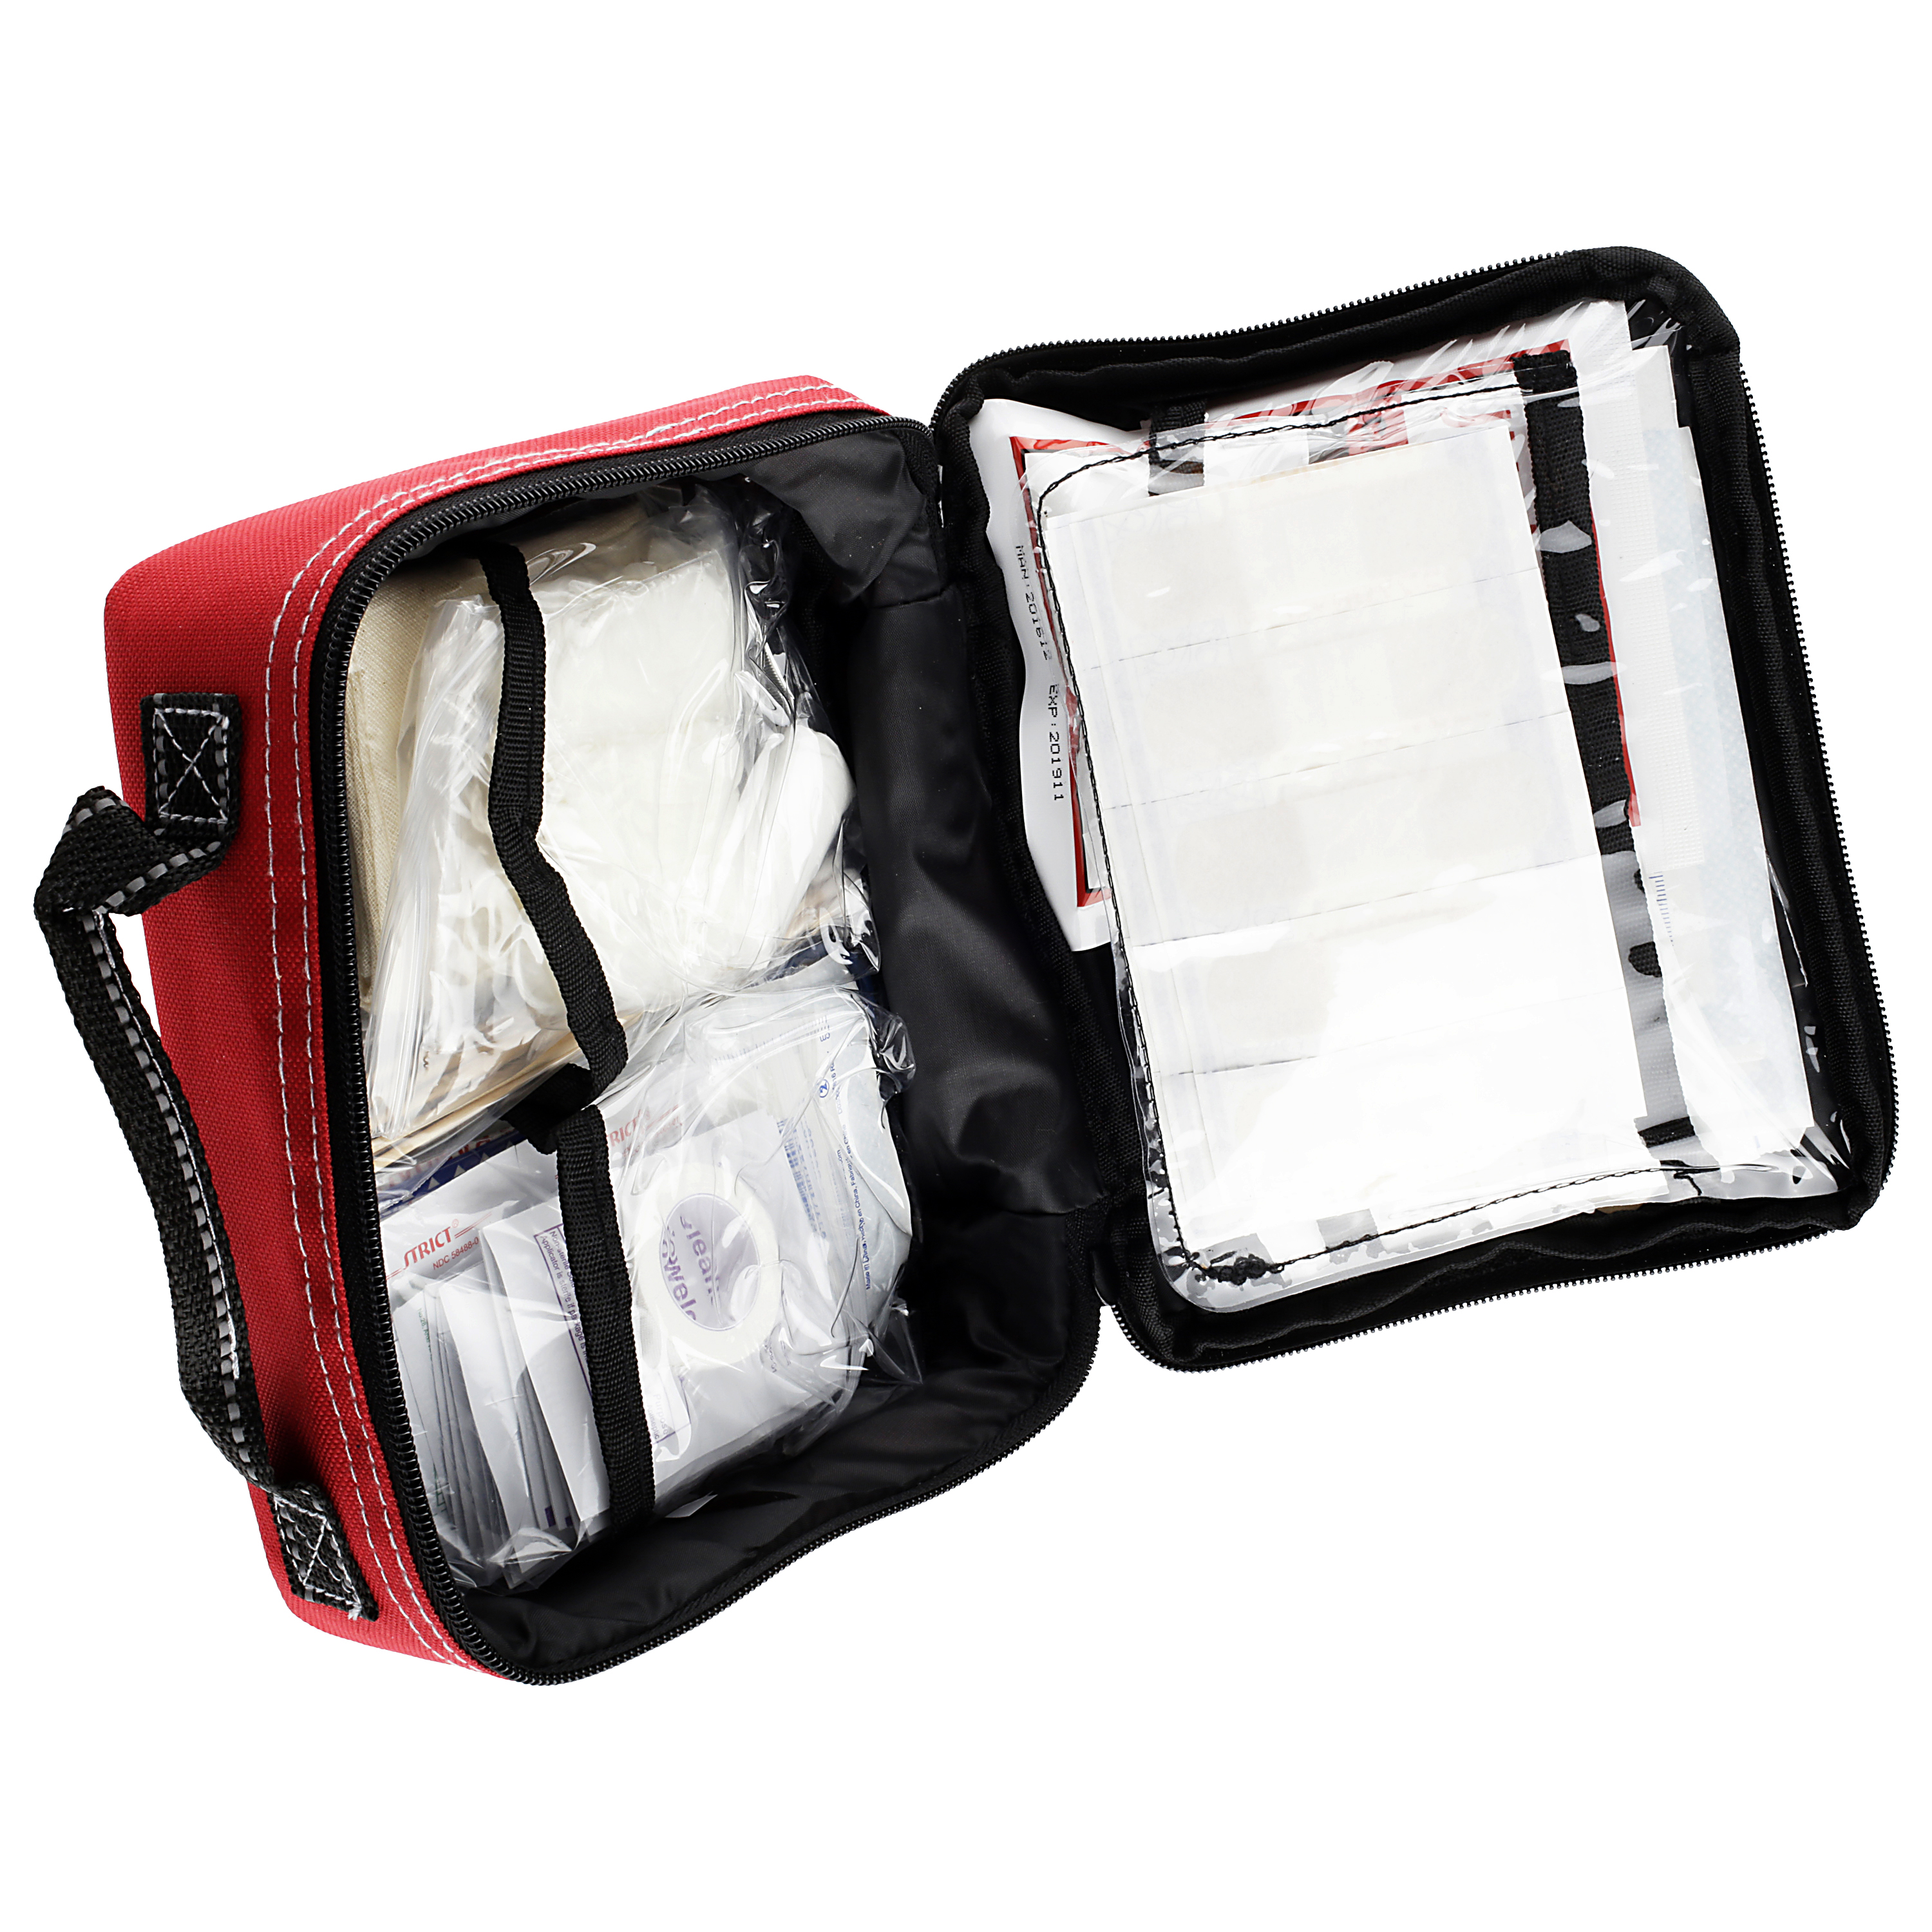 Justin Case Family First Aid Kit - image 5 of 5